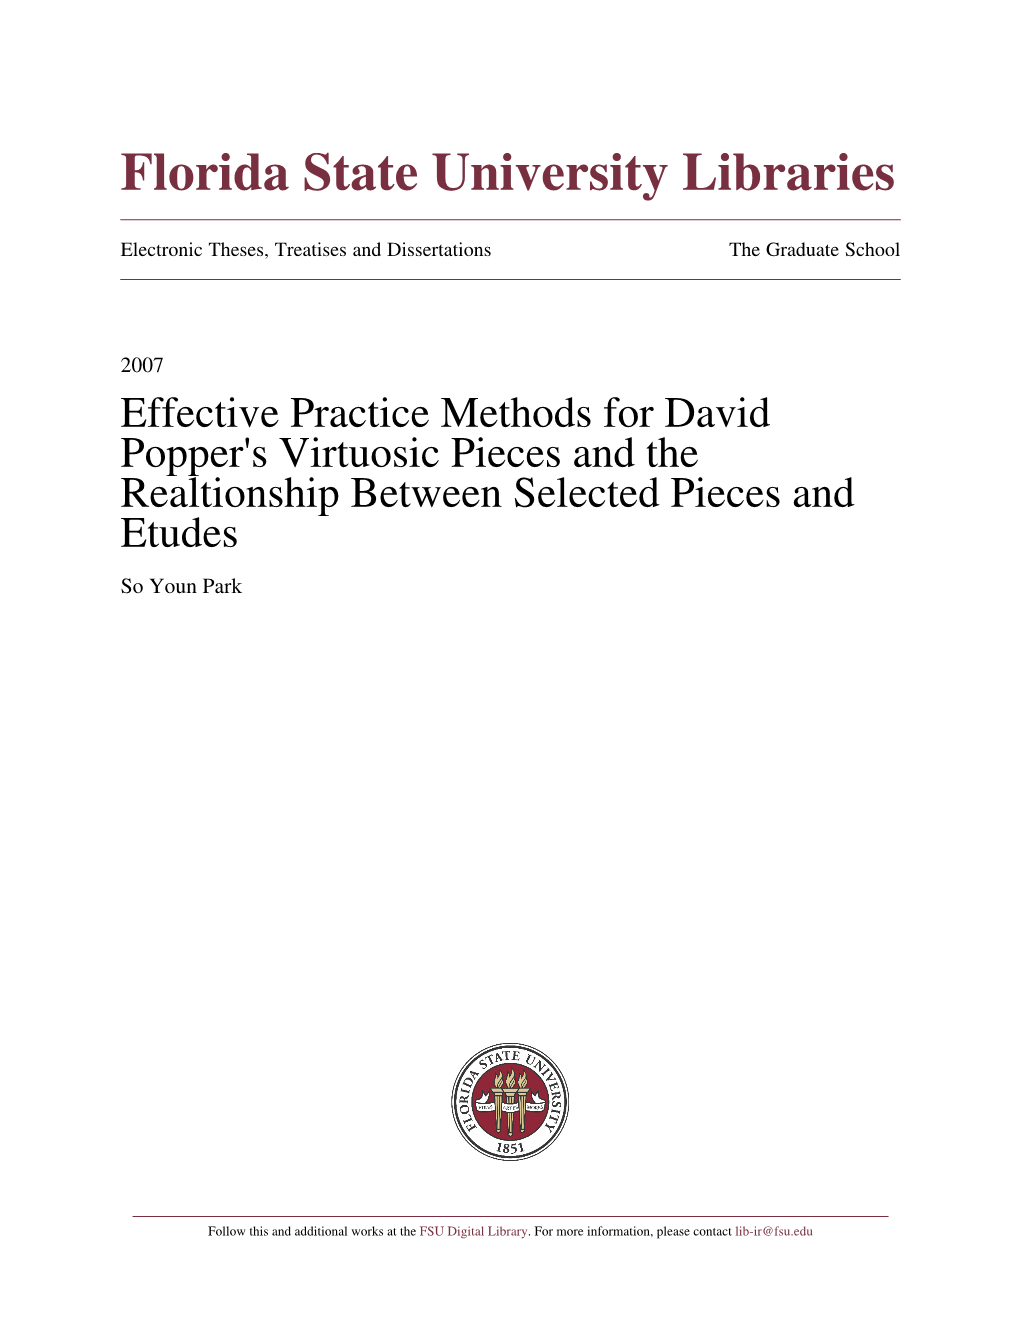 Effective Practice Methods for David Popper's Virtuosic Pieces and the Realtionship Between Selected Pieces and Etudes So Youn Park